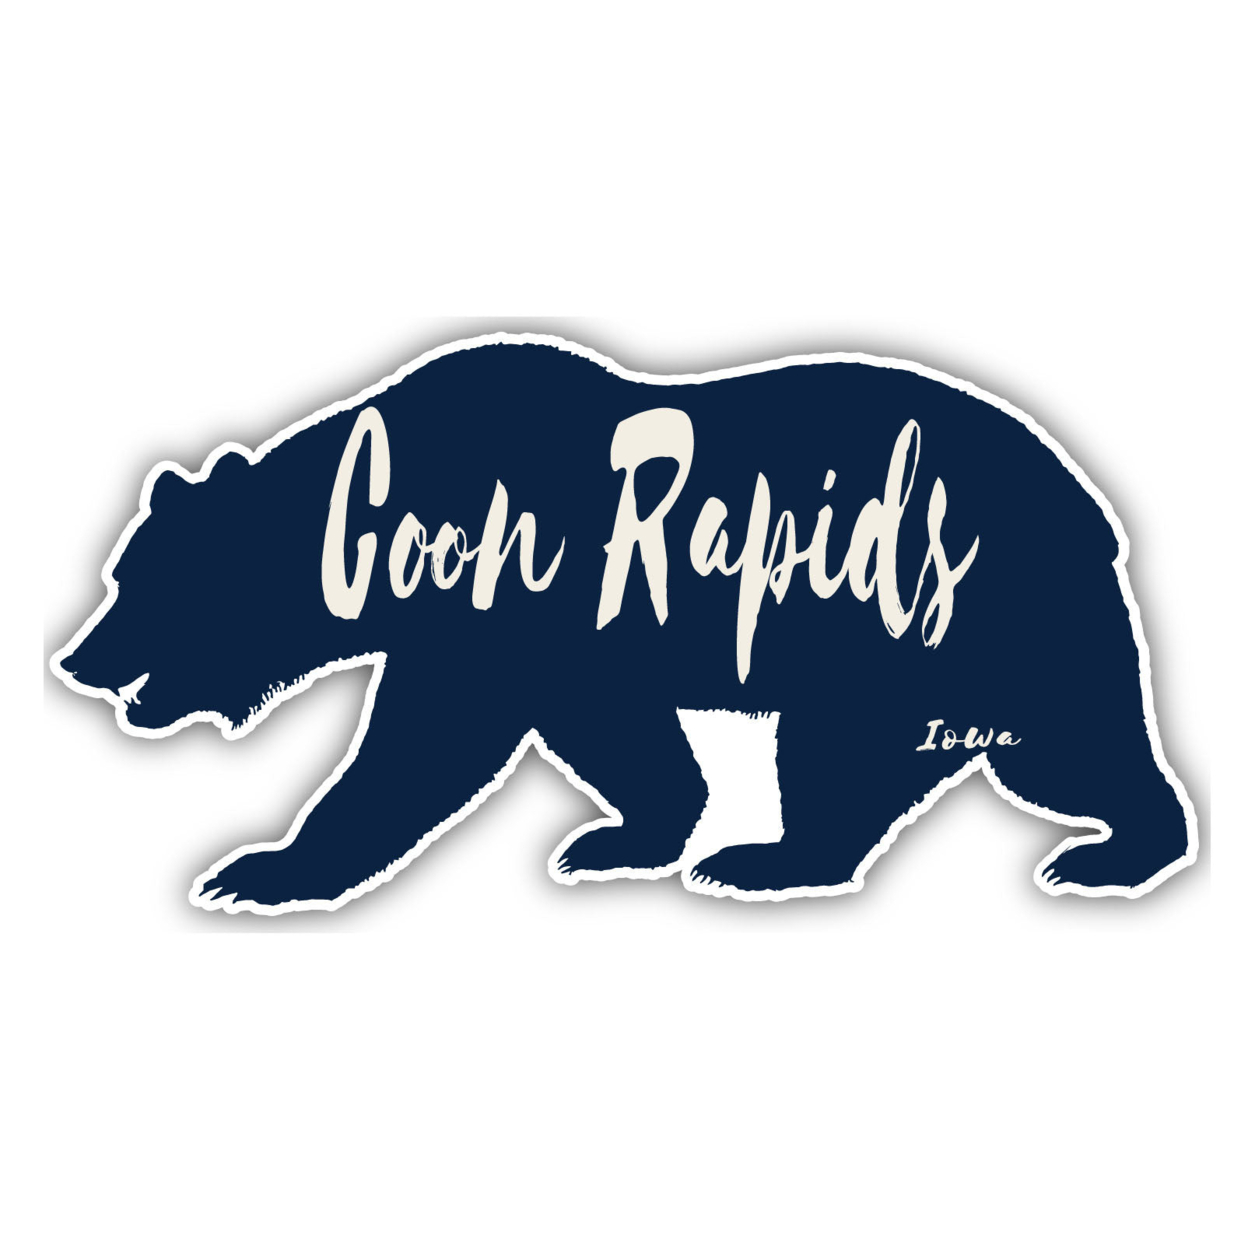 Coon Rapids Iowa Souvenir Decorative Stickers (Choose Theme And Size) - 4-Pack, 10-Inch, Bear